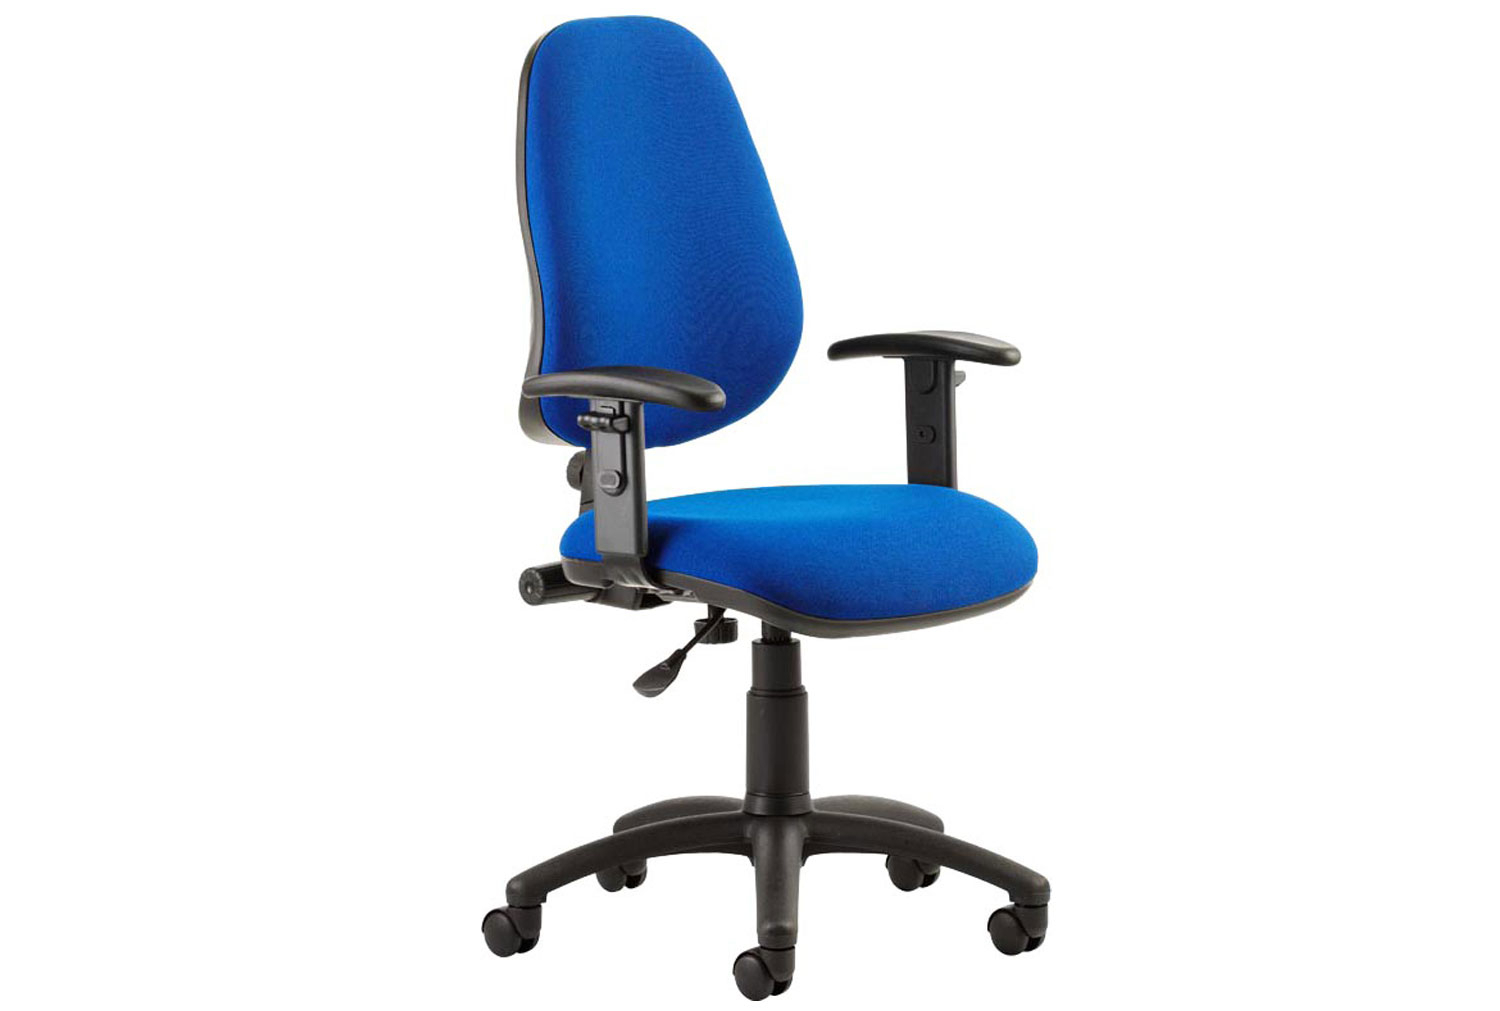 Lunar 1 Lever Operator Office Chair With Height Adjustable Arms, Blue